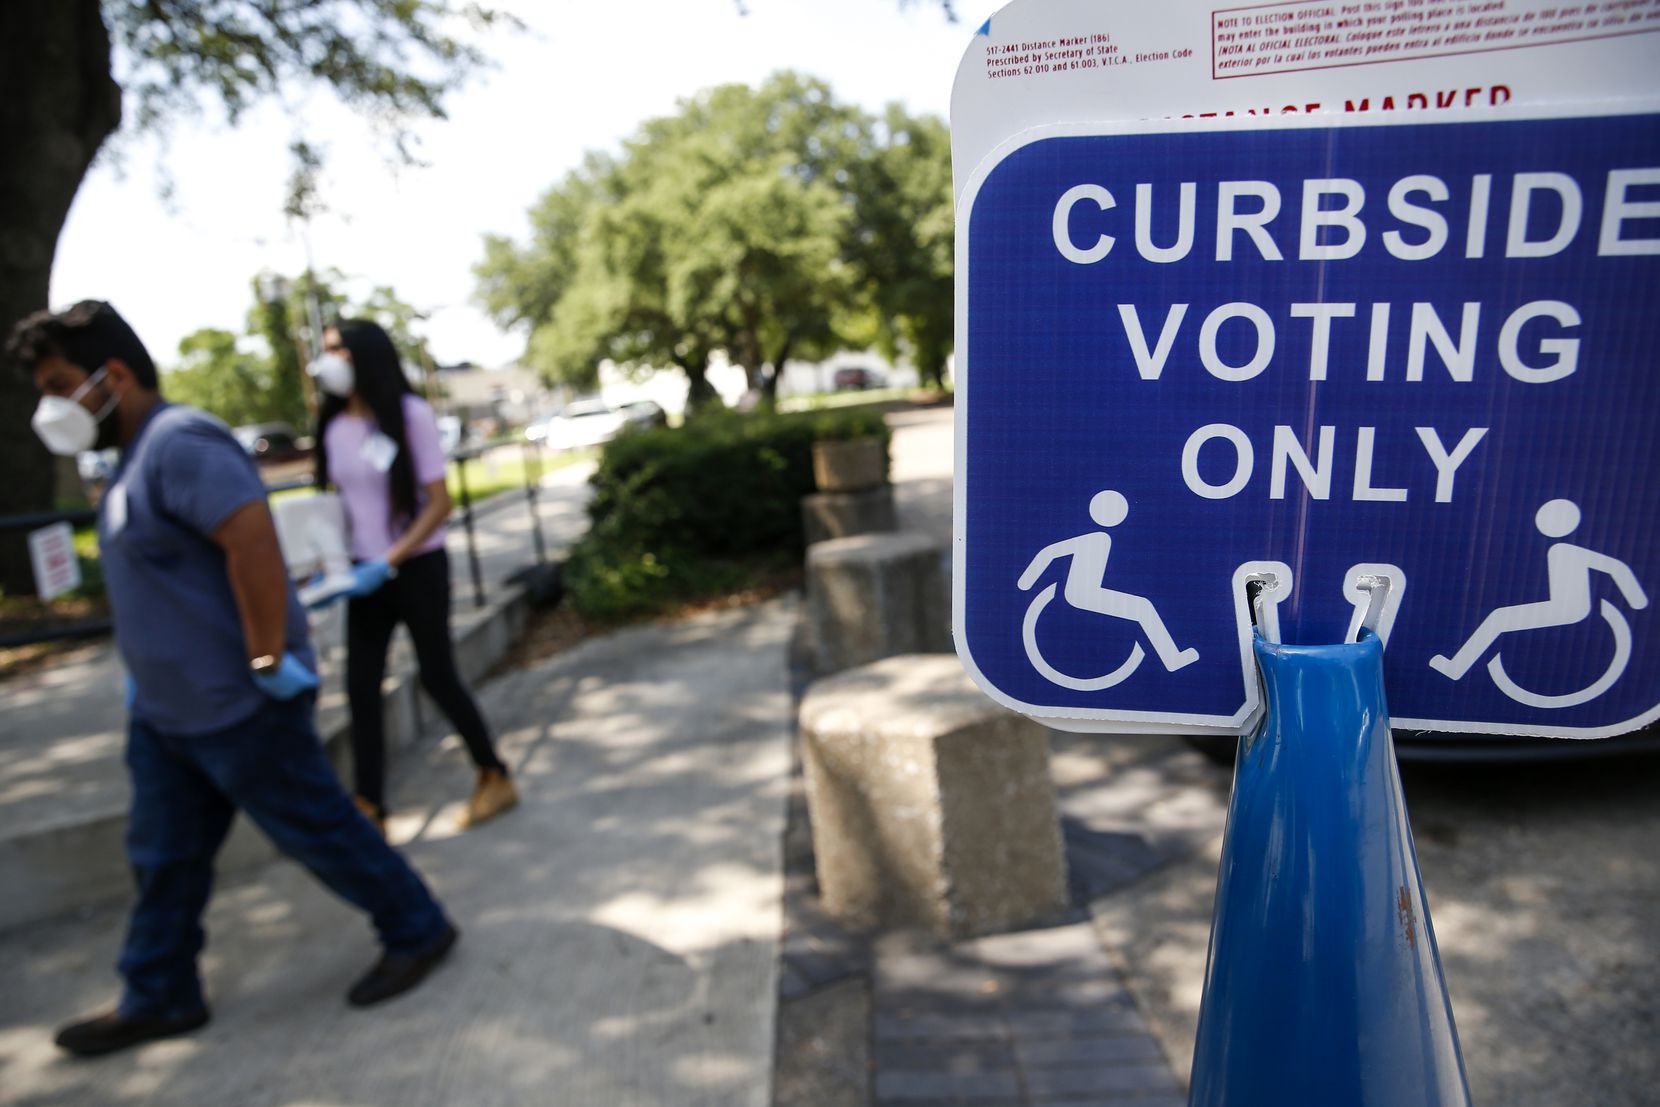 High school poll workers Sebastian Roman (left), 18, and Diana Paulin, 18, work a curbside voting lane during early voting at Beckley Courthouse on Thursday, July 9, 2020 in Dallas. (Ryan Michalesko/The Dallas Morning News)